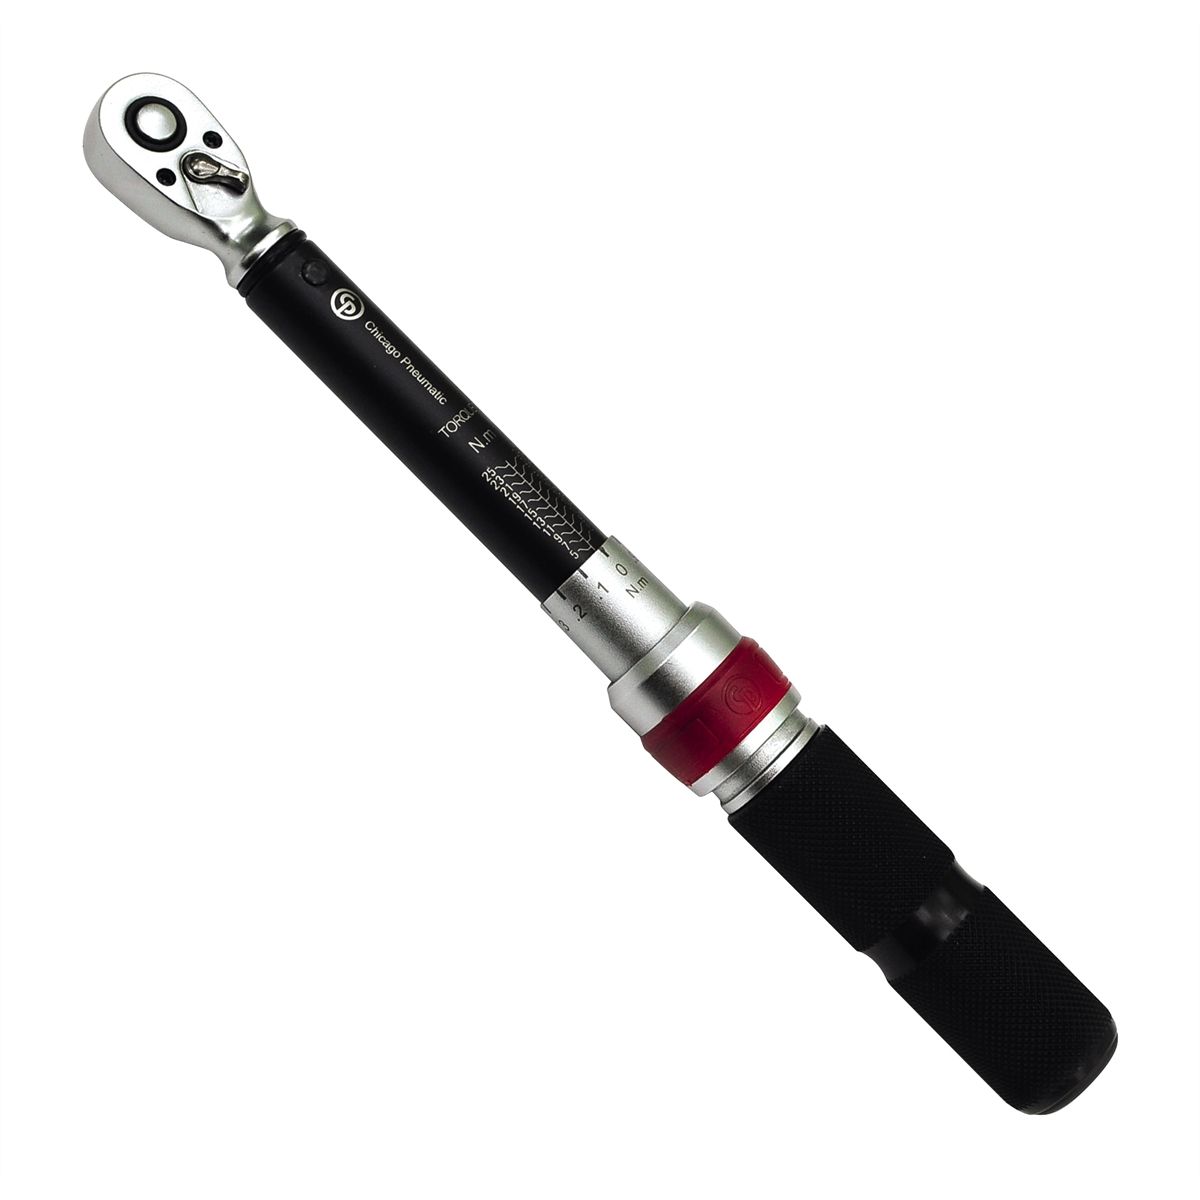 CP8910 3/8" Torque Wrench - 15-75 ft-lbs